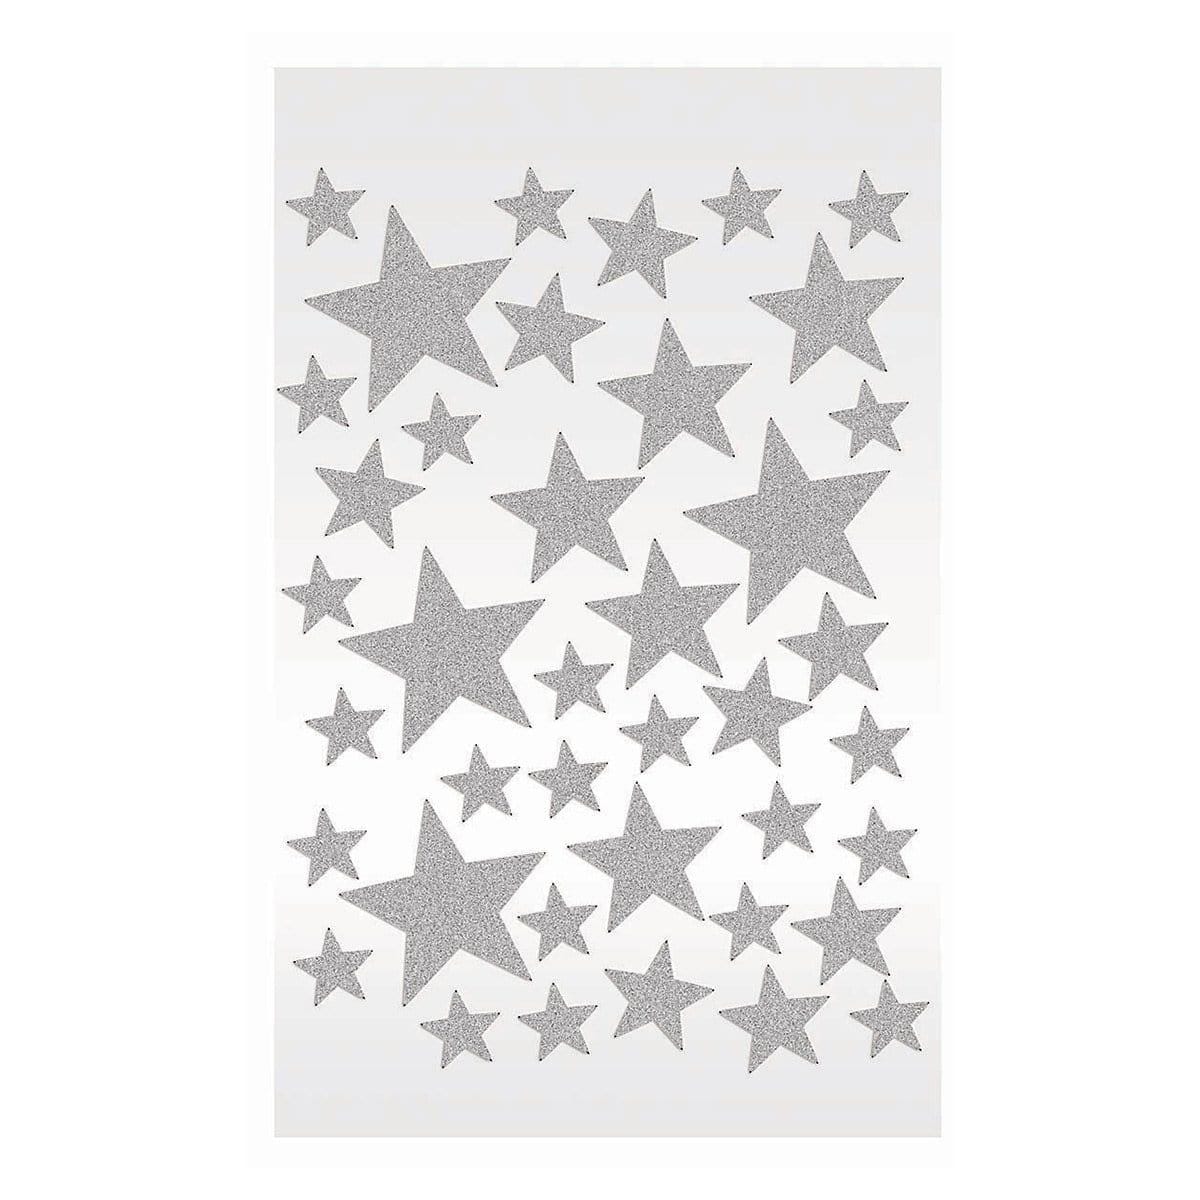 Buy Wedding Diamonds Stickers - Stars - Silver sold at Party Expert